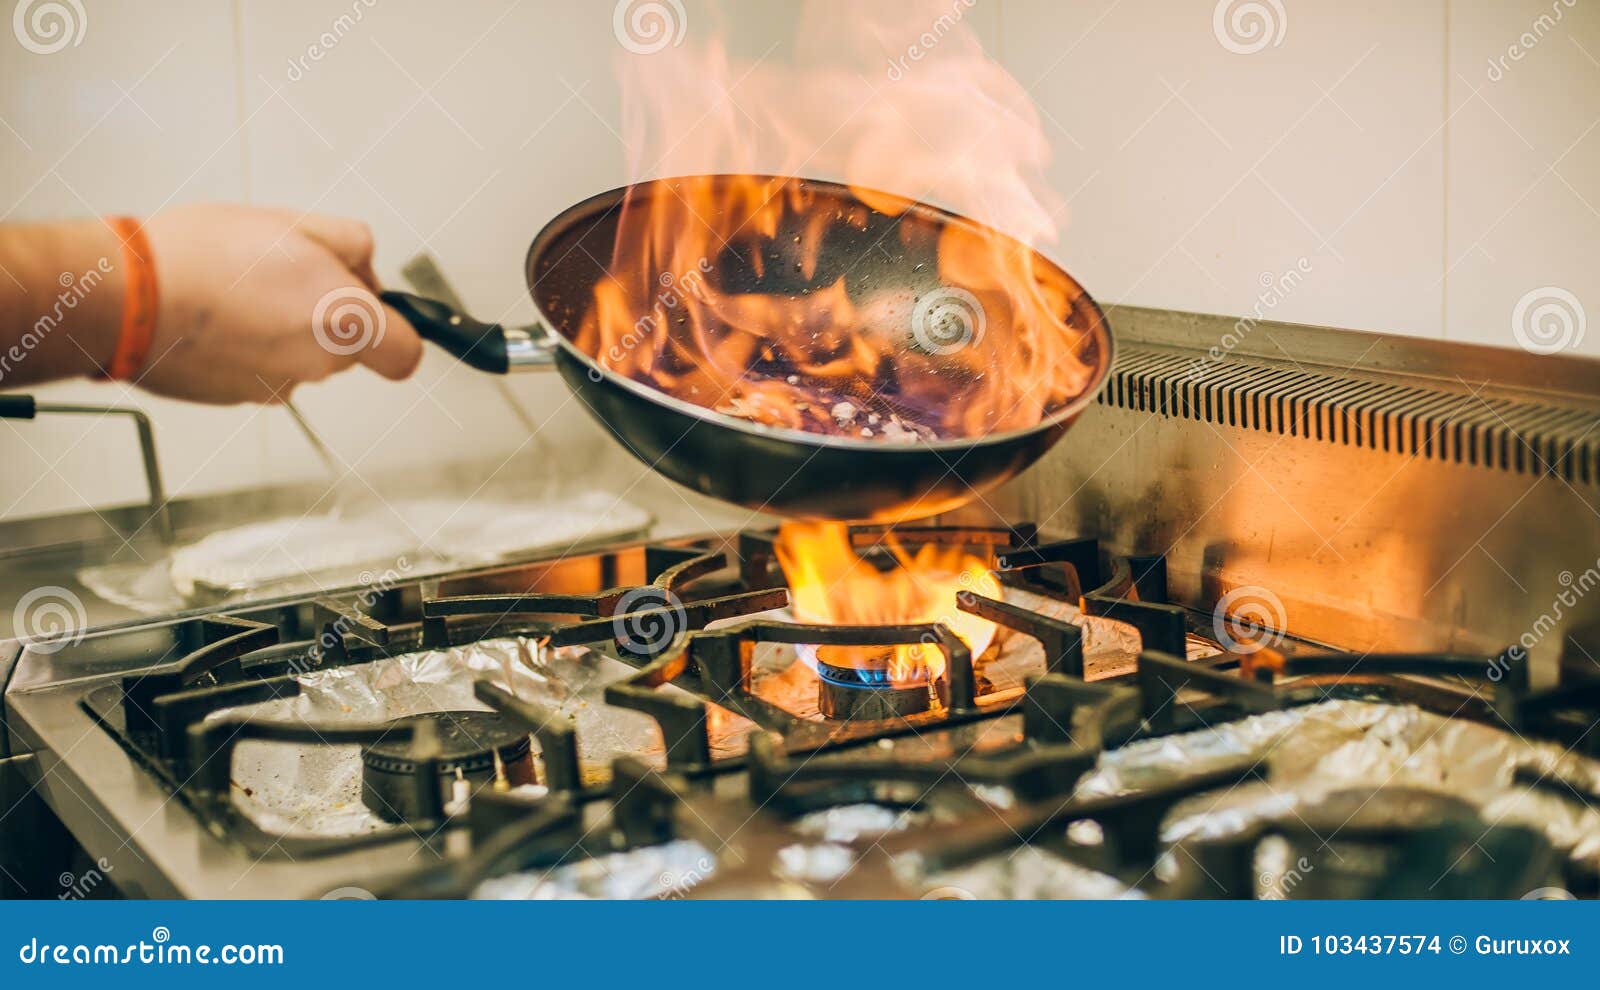 Unrecognizable man cooking in fatiscent big pan or wok in a small